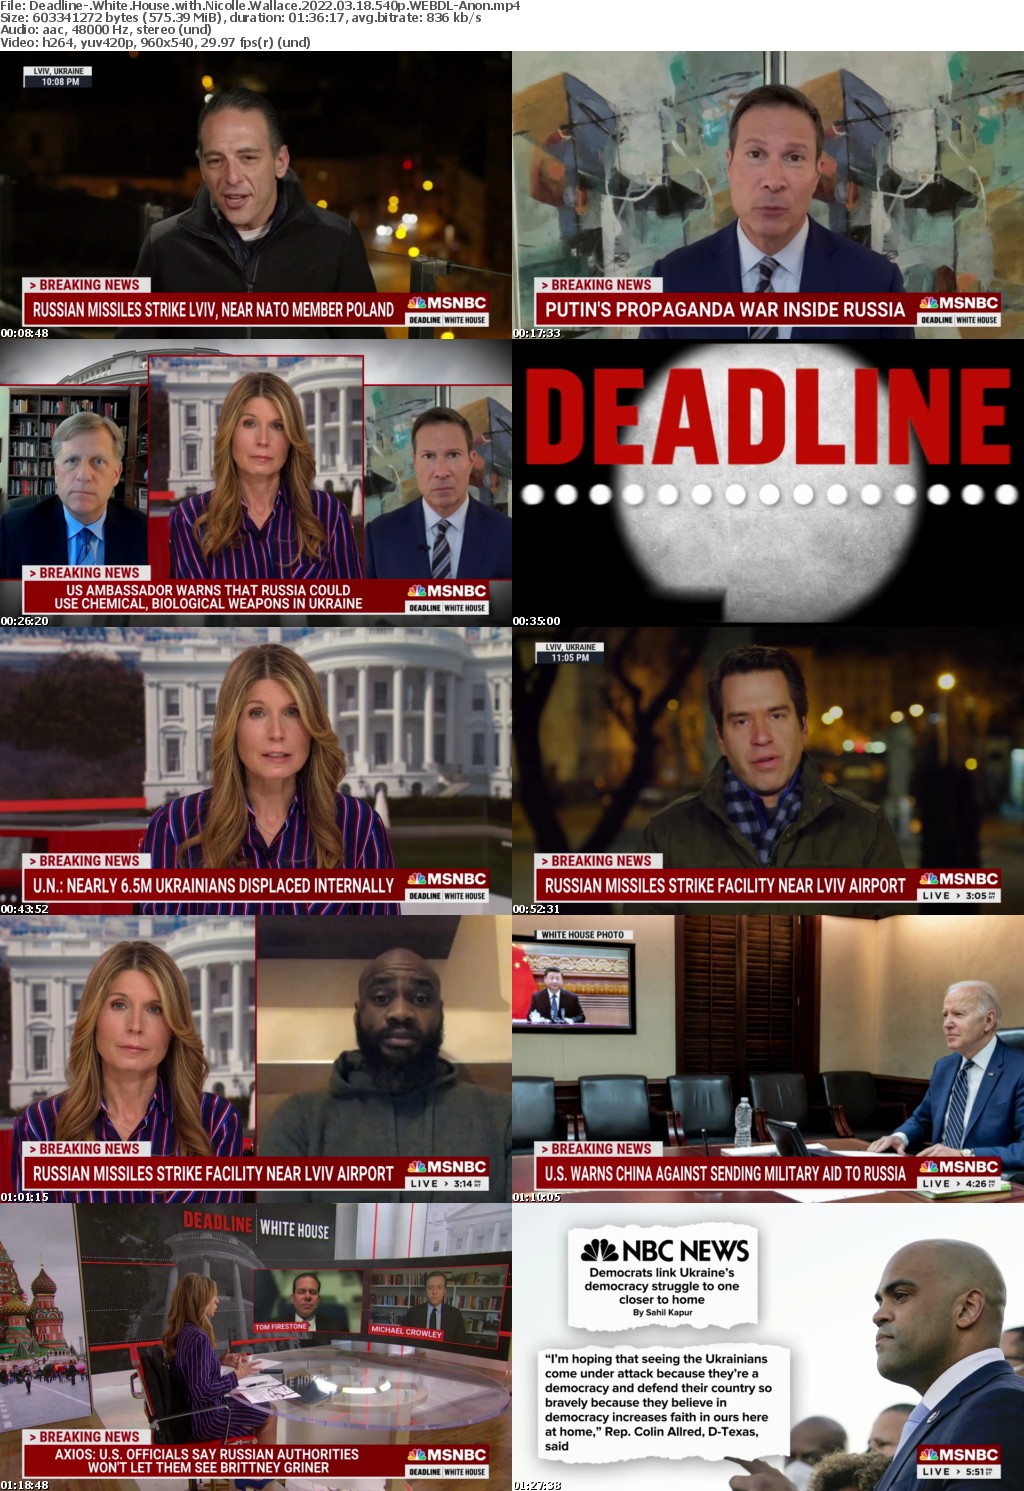 Deadline- White House with Nicolle Wallace 2022 03 18 540p WEBDL-Anon